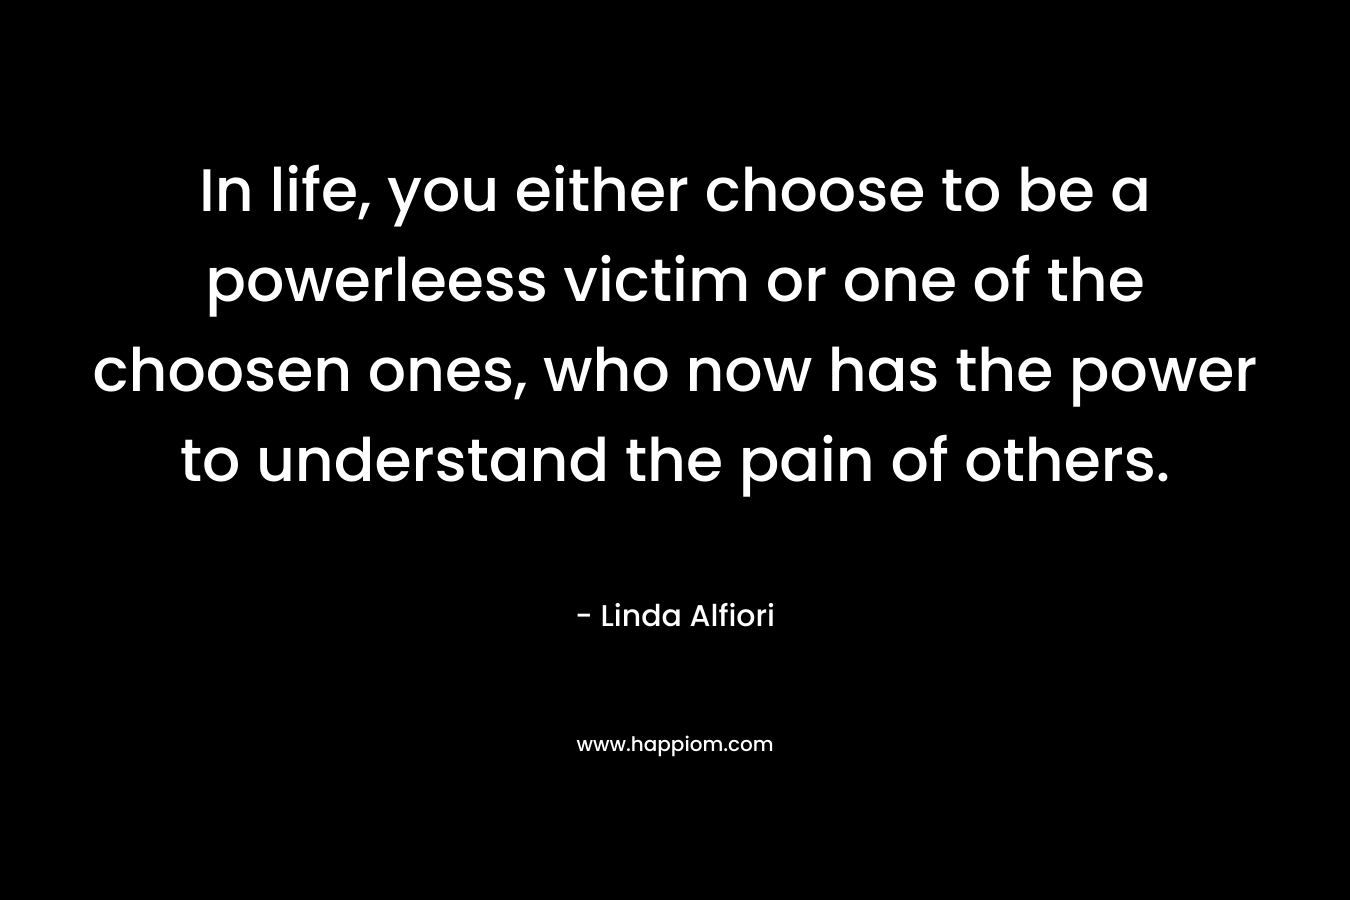 In life, you either choose to be a powerleess victim or one of the choosen ones, who now has the power to understand the pain of others.